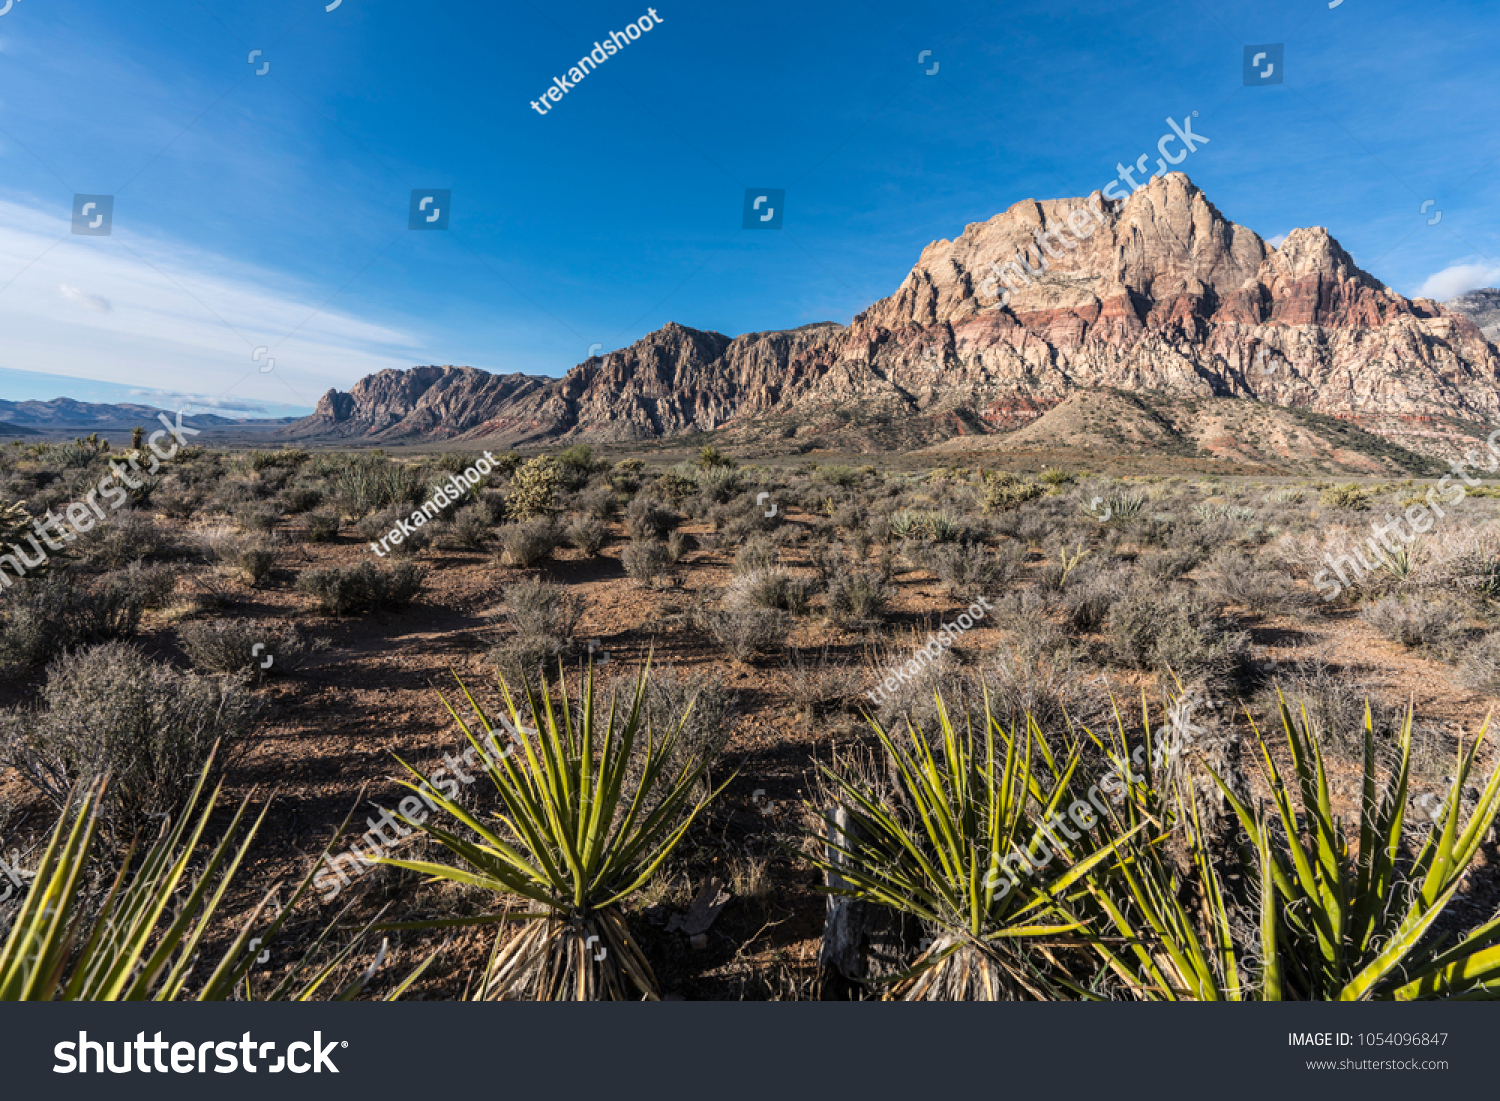 Mojave desert yuccas with Mt Wilson in background at Red Rock Canyon National Conservation Area near Las Vegas Nevada. #1054096847